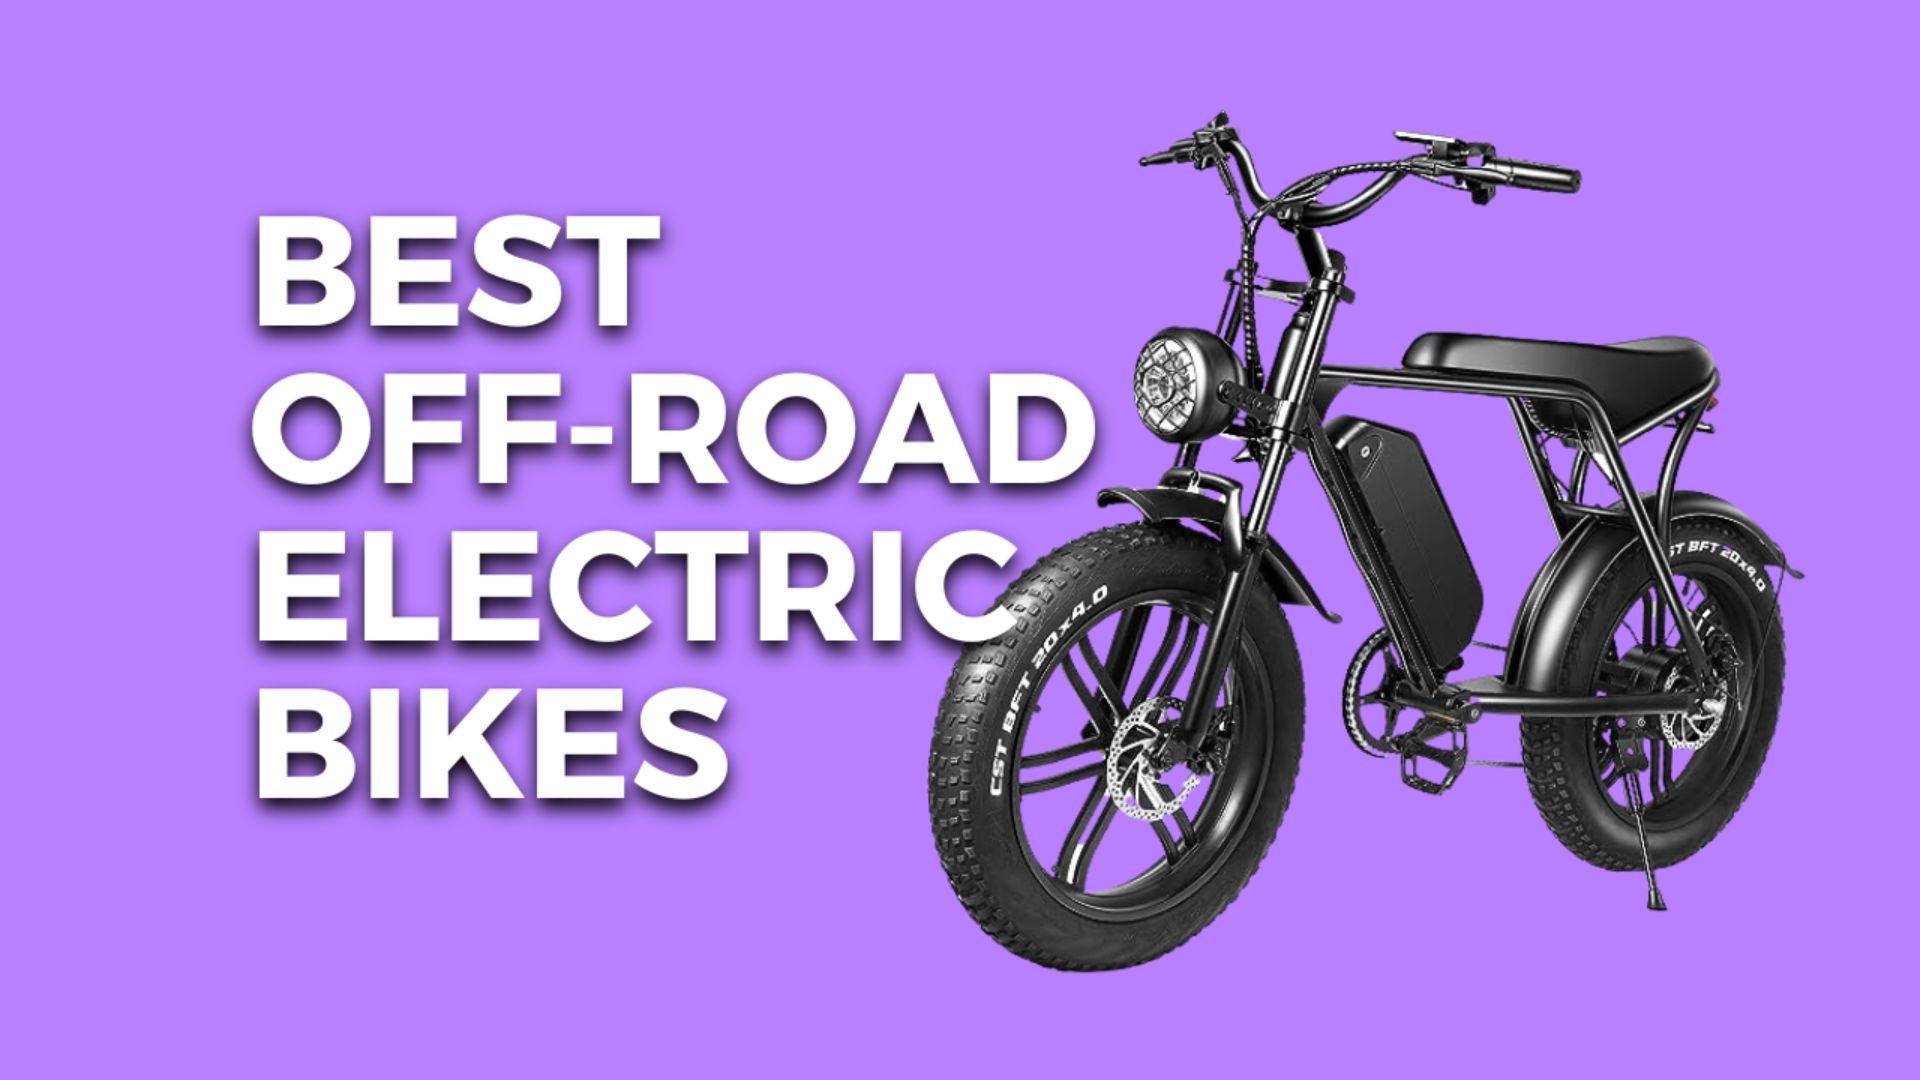 Best Off-road Electric Bikes